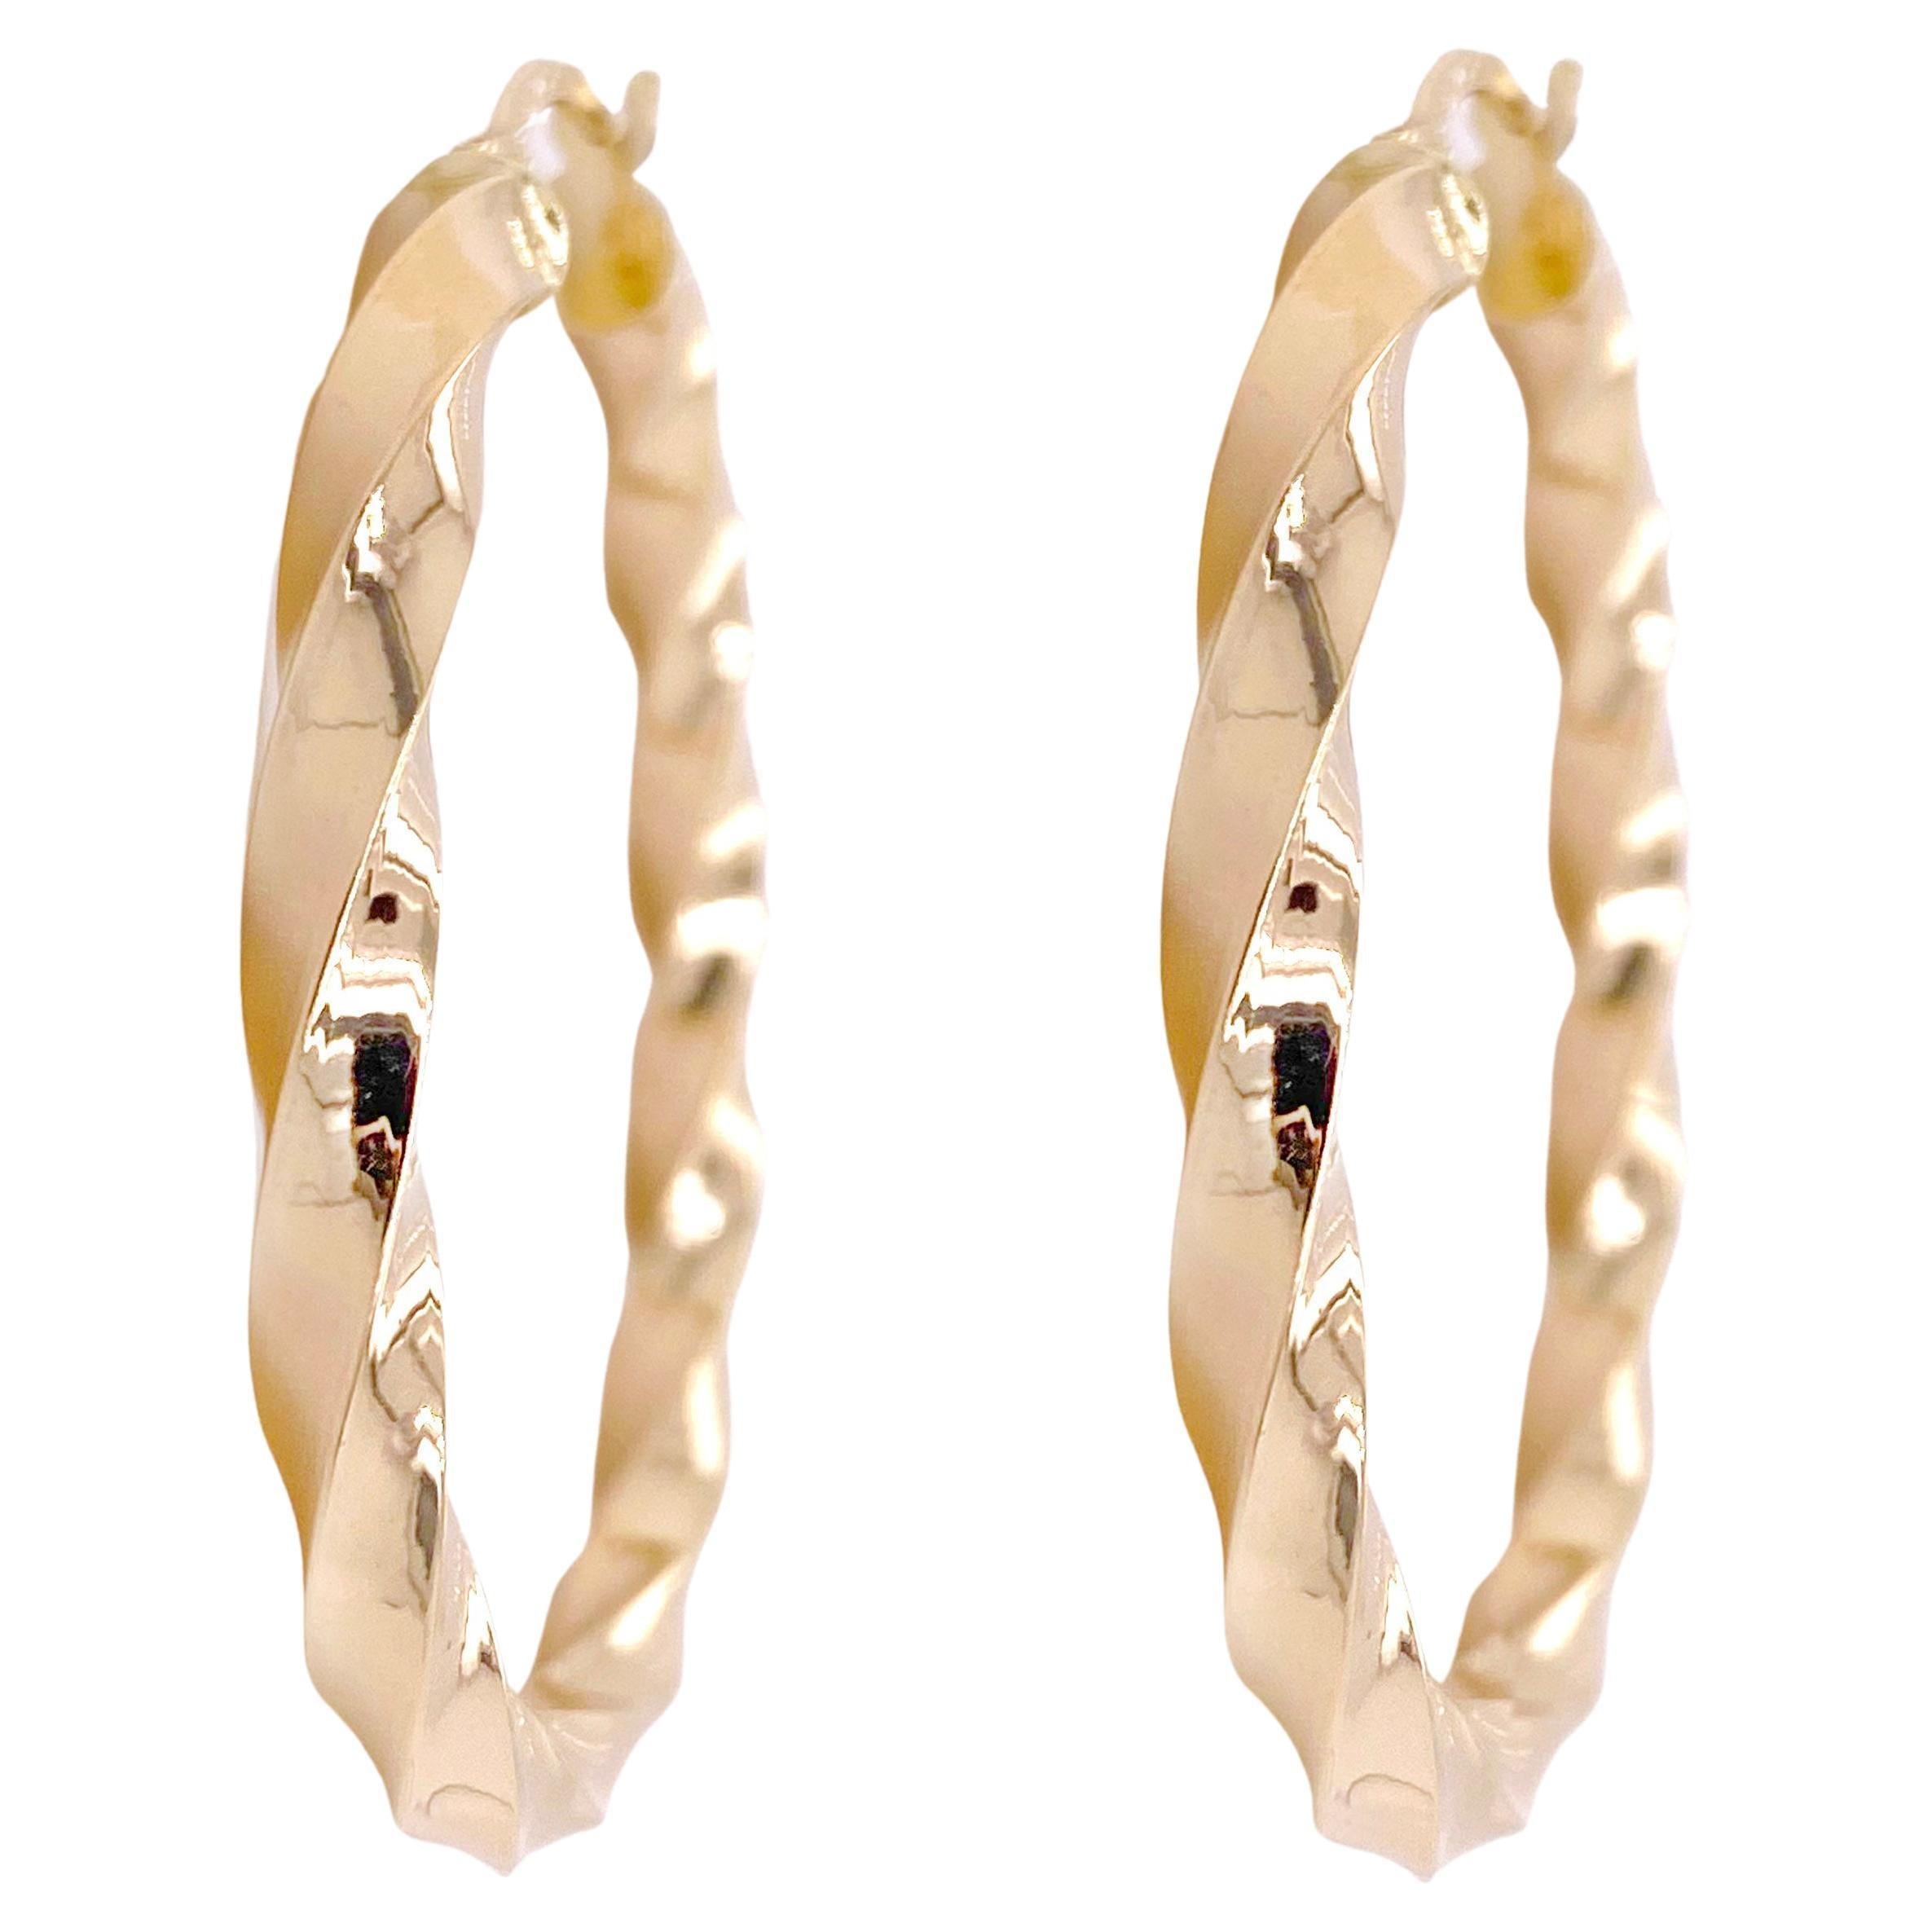 Polished Twisted Gold Hoop Earrings, 14K Yellow Gold Hoops